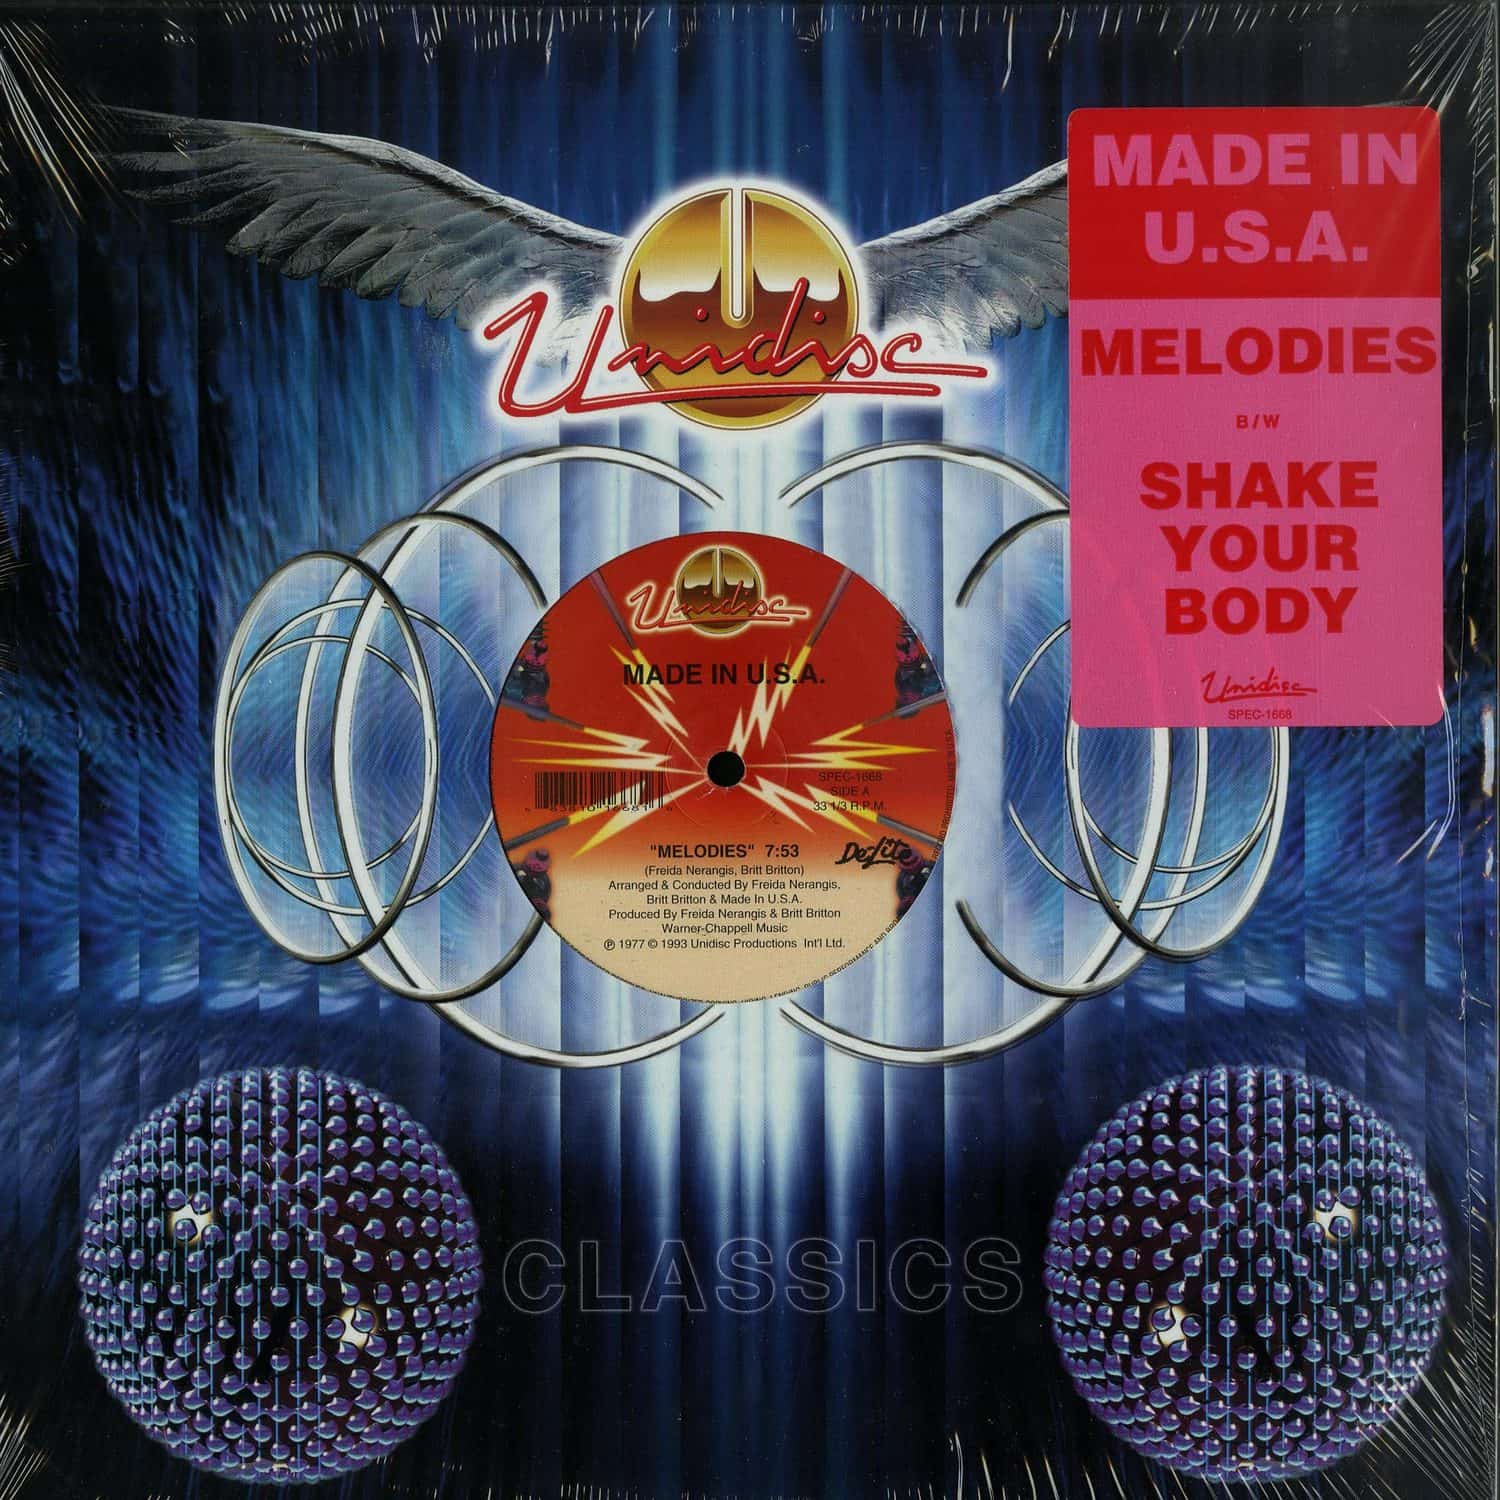 Made In U.S.A. - MELODIES / SHAKE YOUR BODY